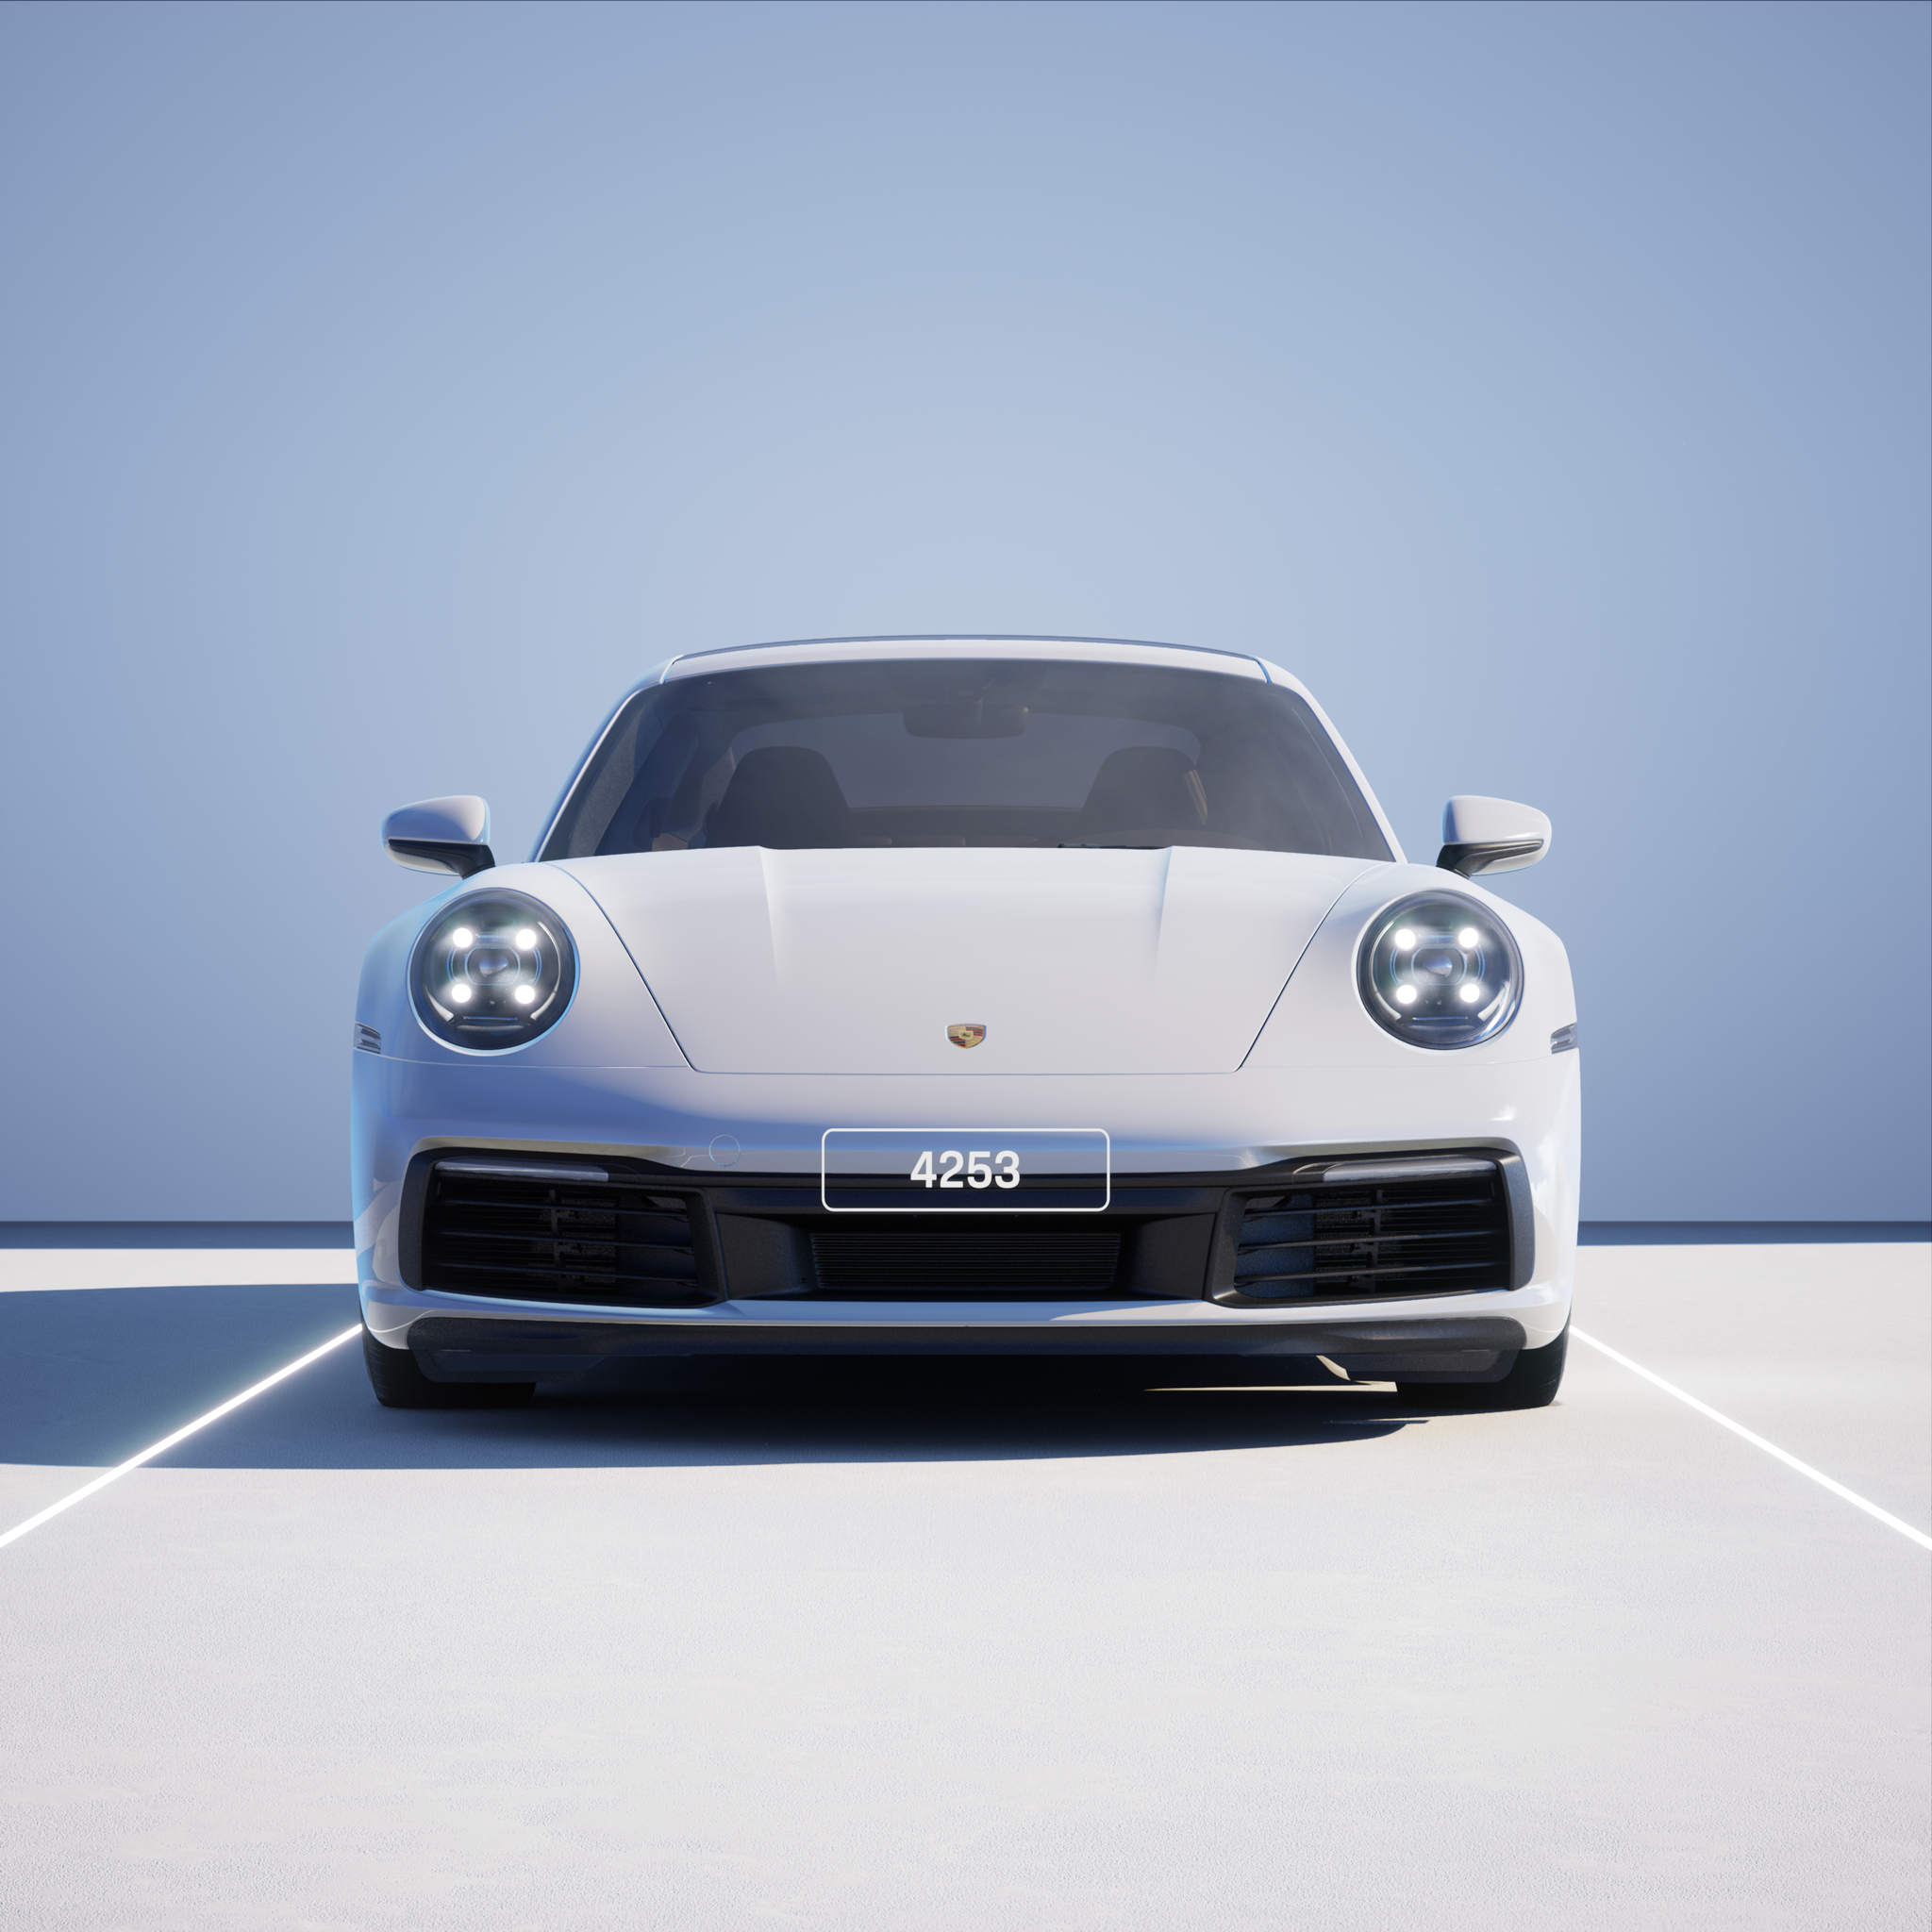 The PORSCHΞ 911 4253 image in phase